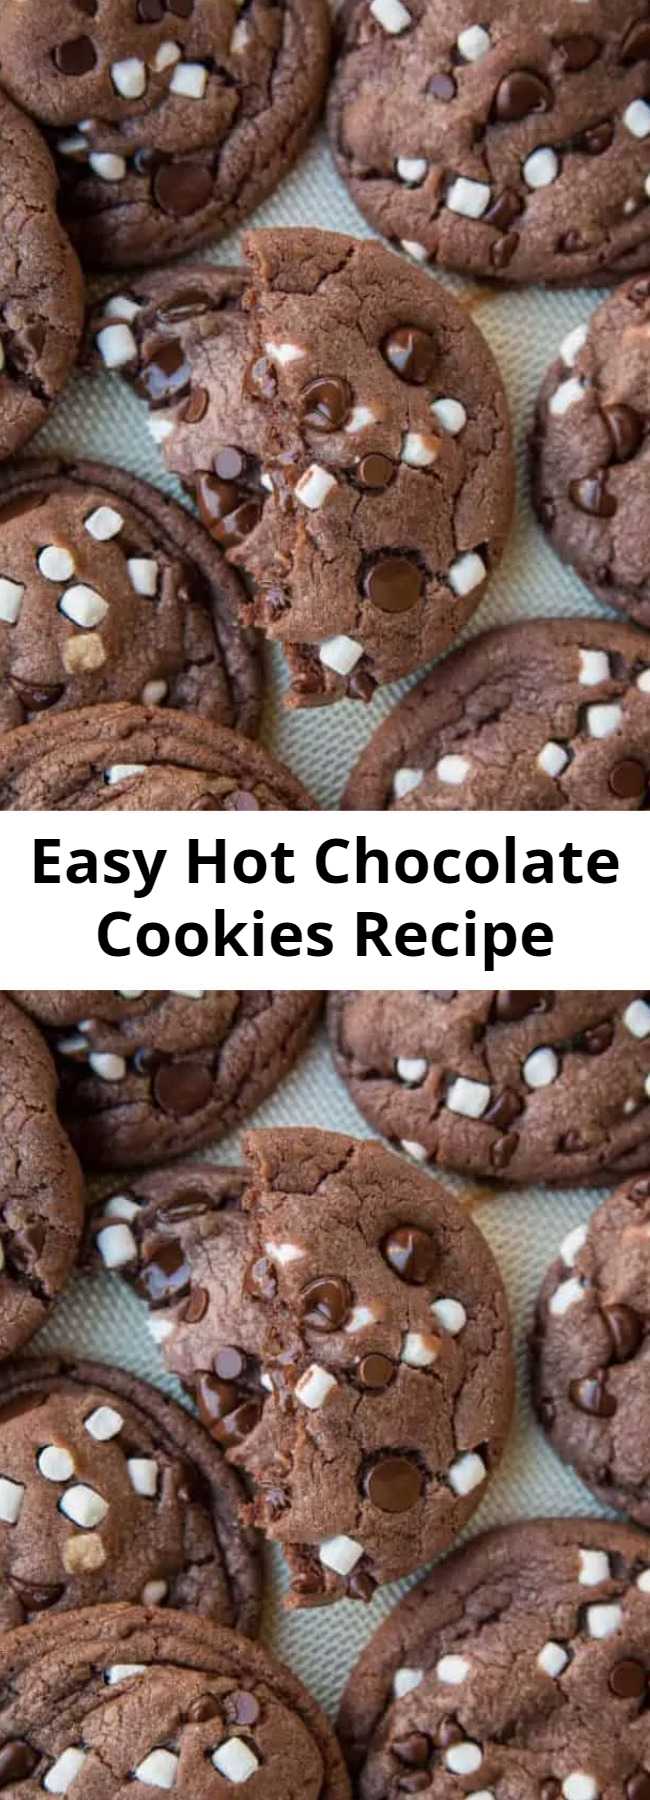 Easy Hot Chocolate Cookies Recipe - These easy Hot Chocolate Cookies are always a hit! Made with real hot cocoa, this is always a popular winter or Christmas cookie and is perfect for cookie exchanges.